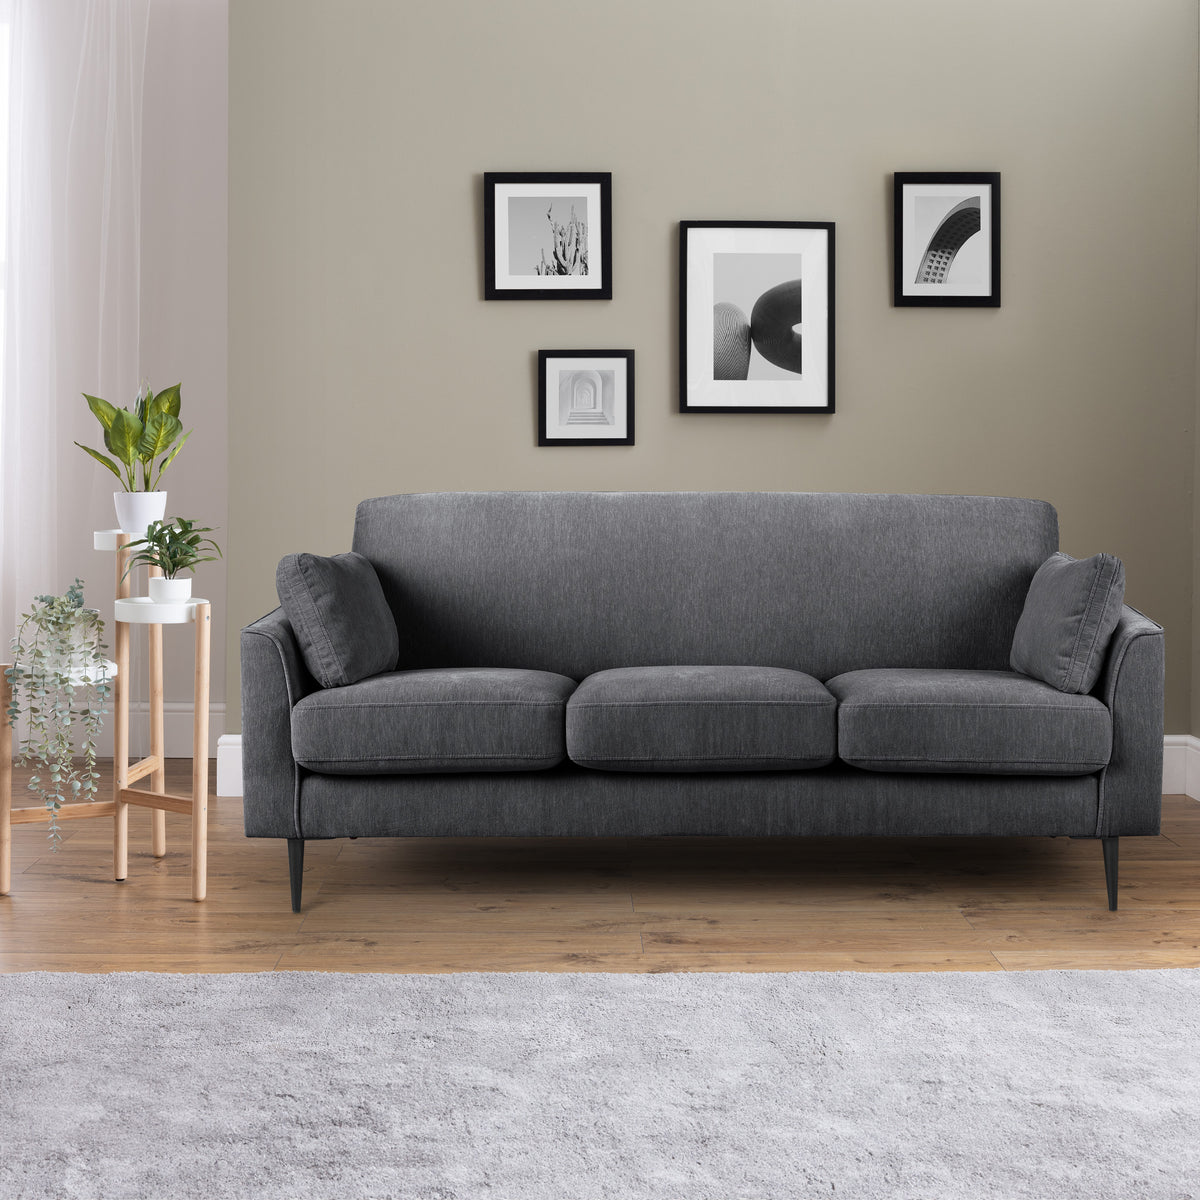 Esme Charcoal Grey 3 Seater Sofa for living room